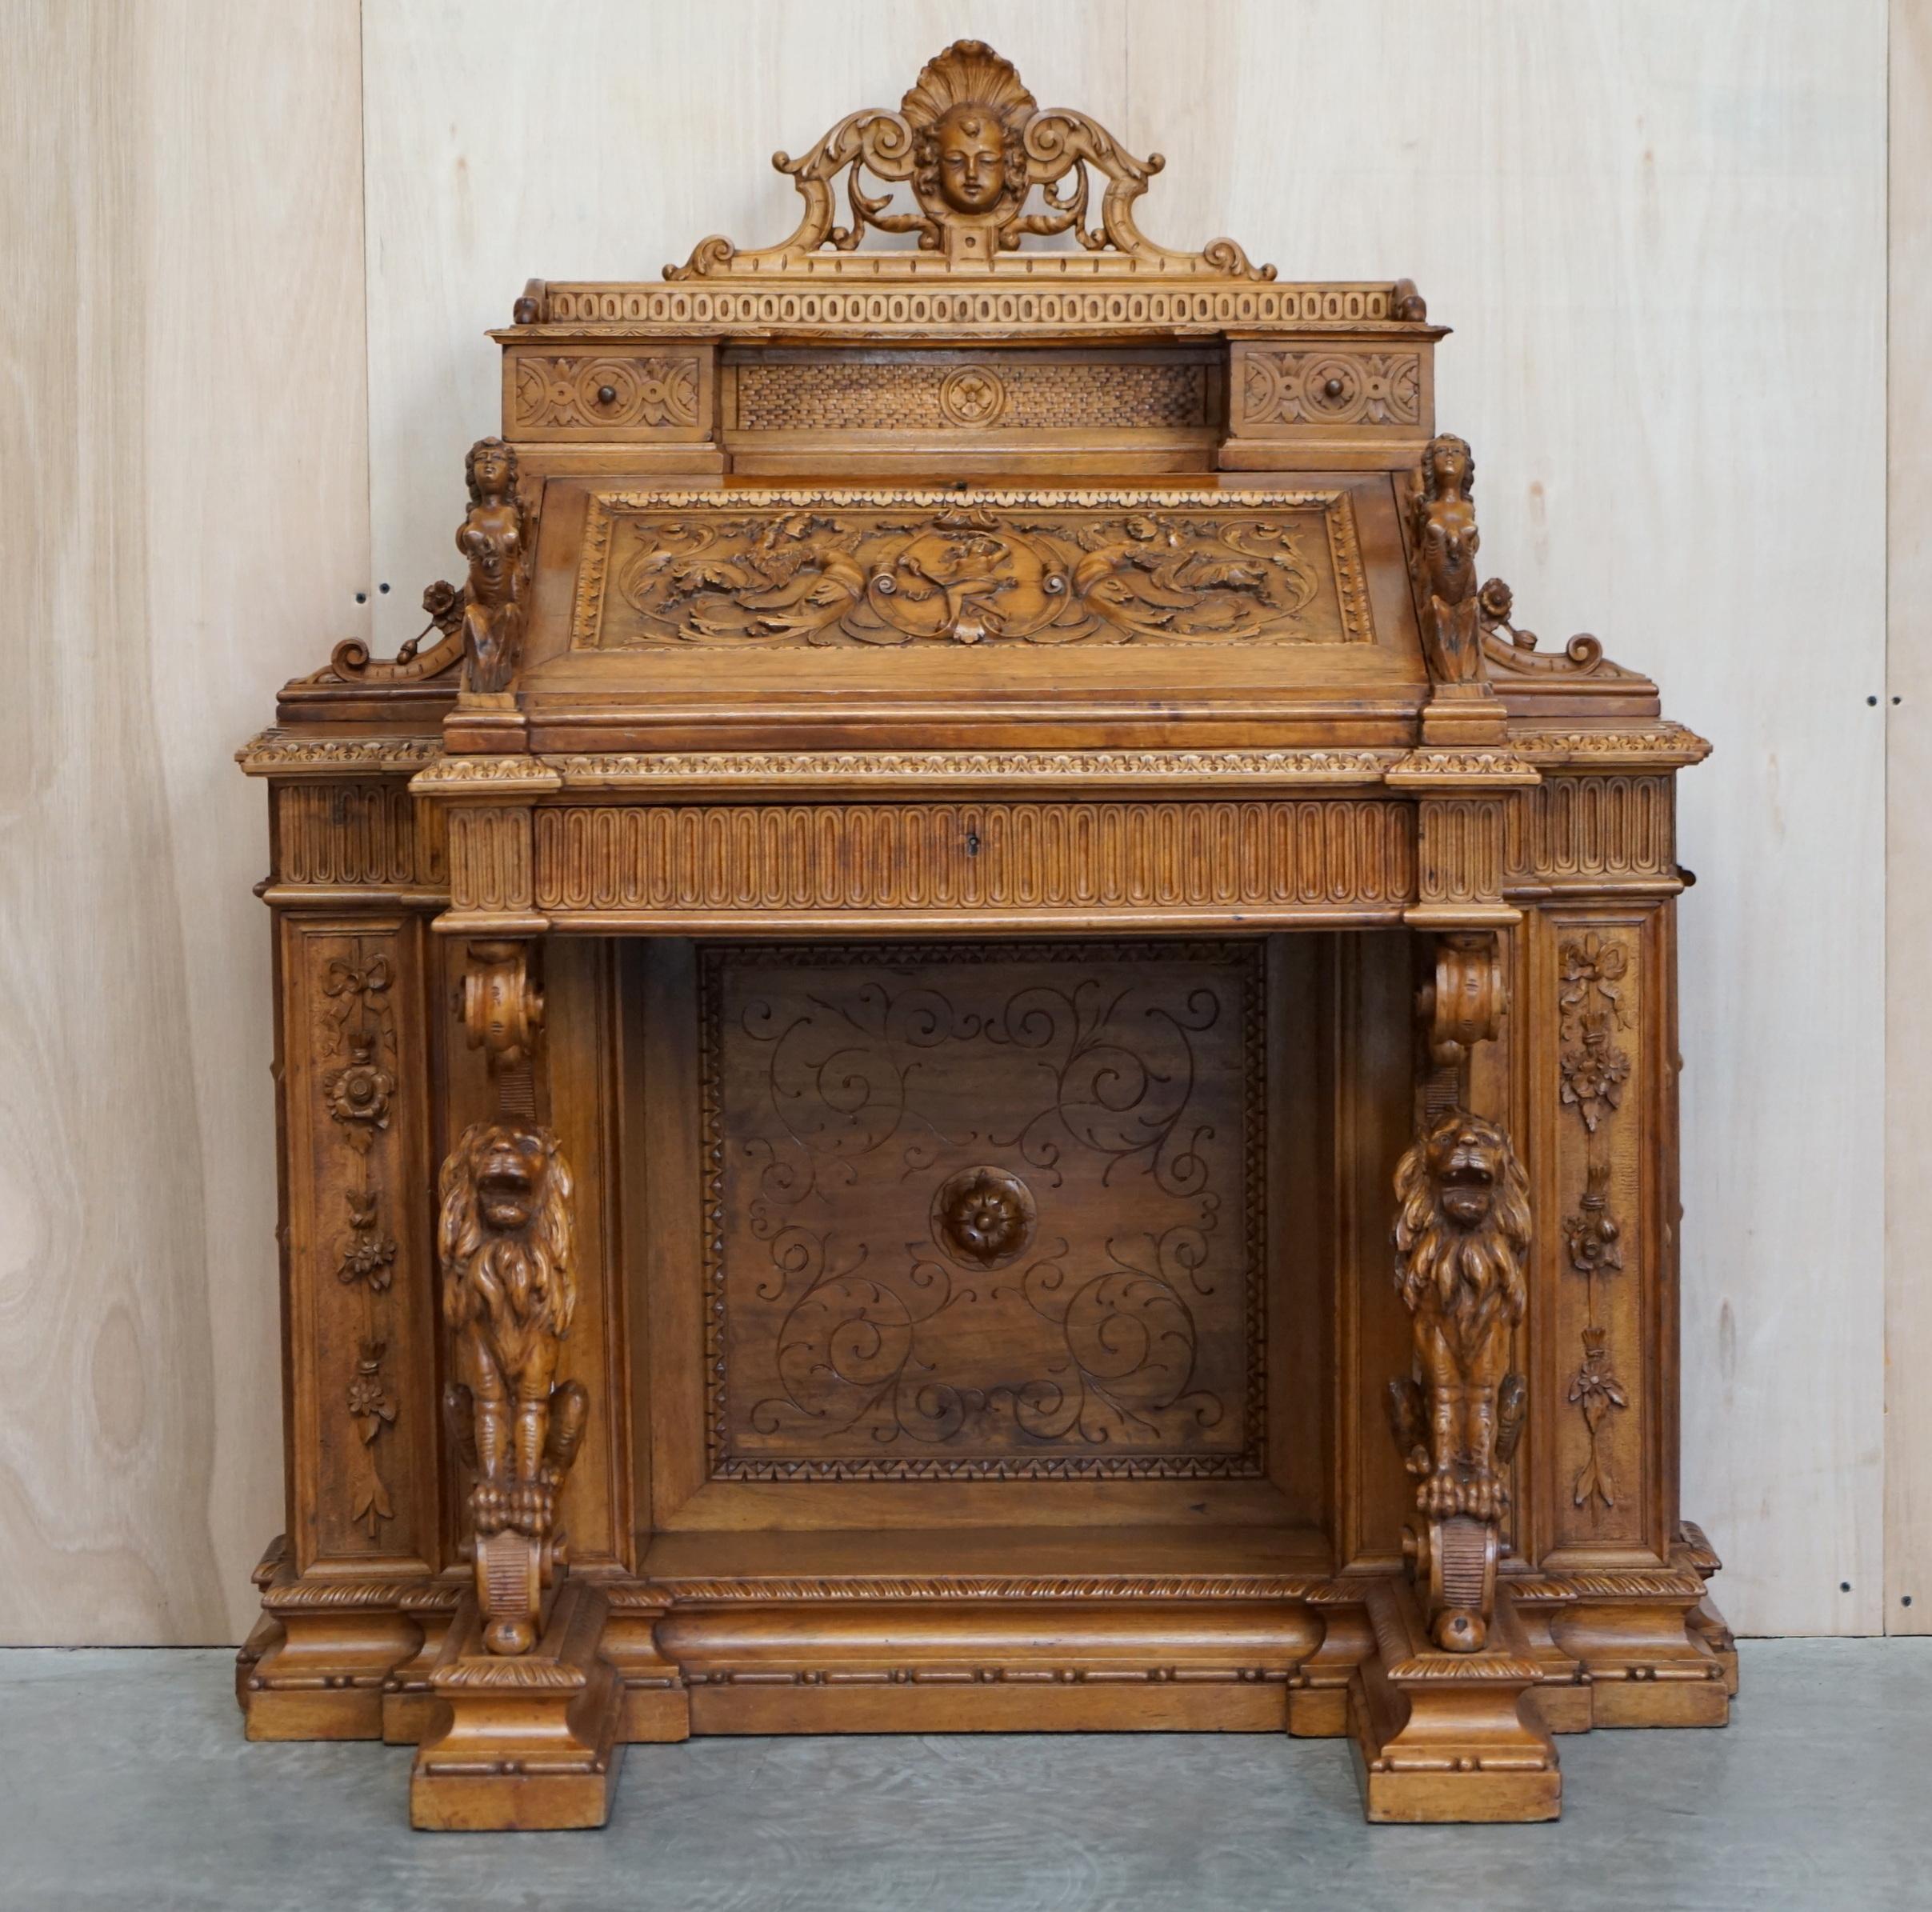 We are delighted to offer for sale this absolutely stunning, exhibition / museum quality, hand carved Italian davenport desk

A truly stunning and well made piece, this would have been made for an exhibition to show off the cabinet makers skill, I